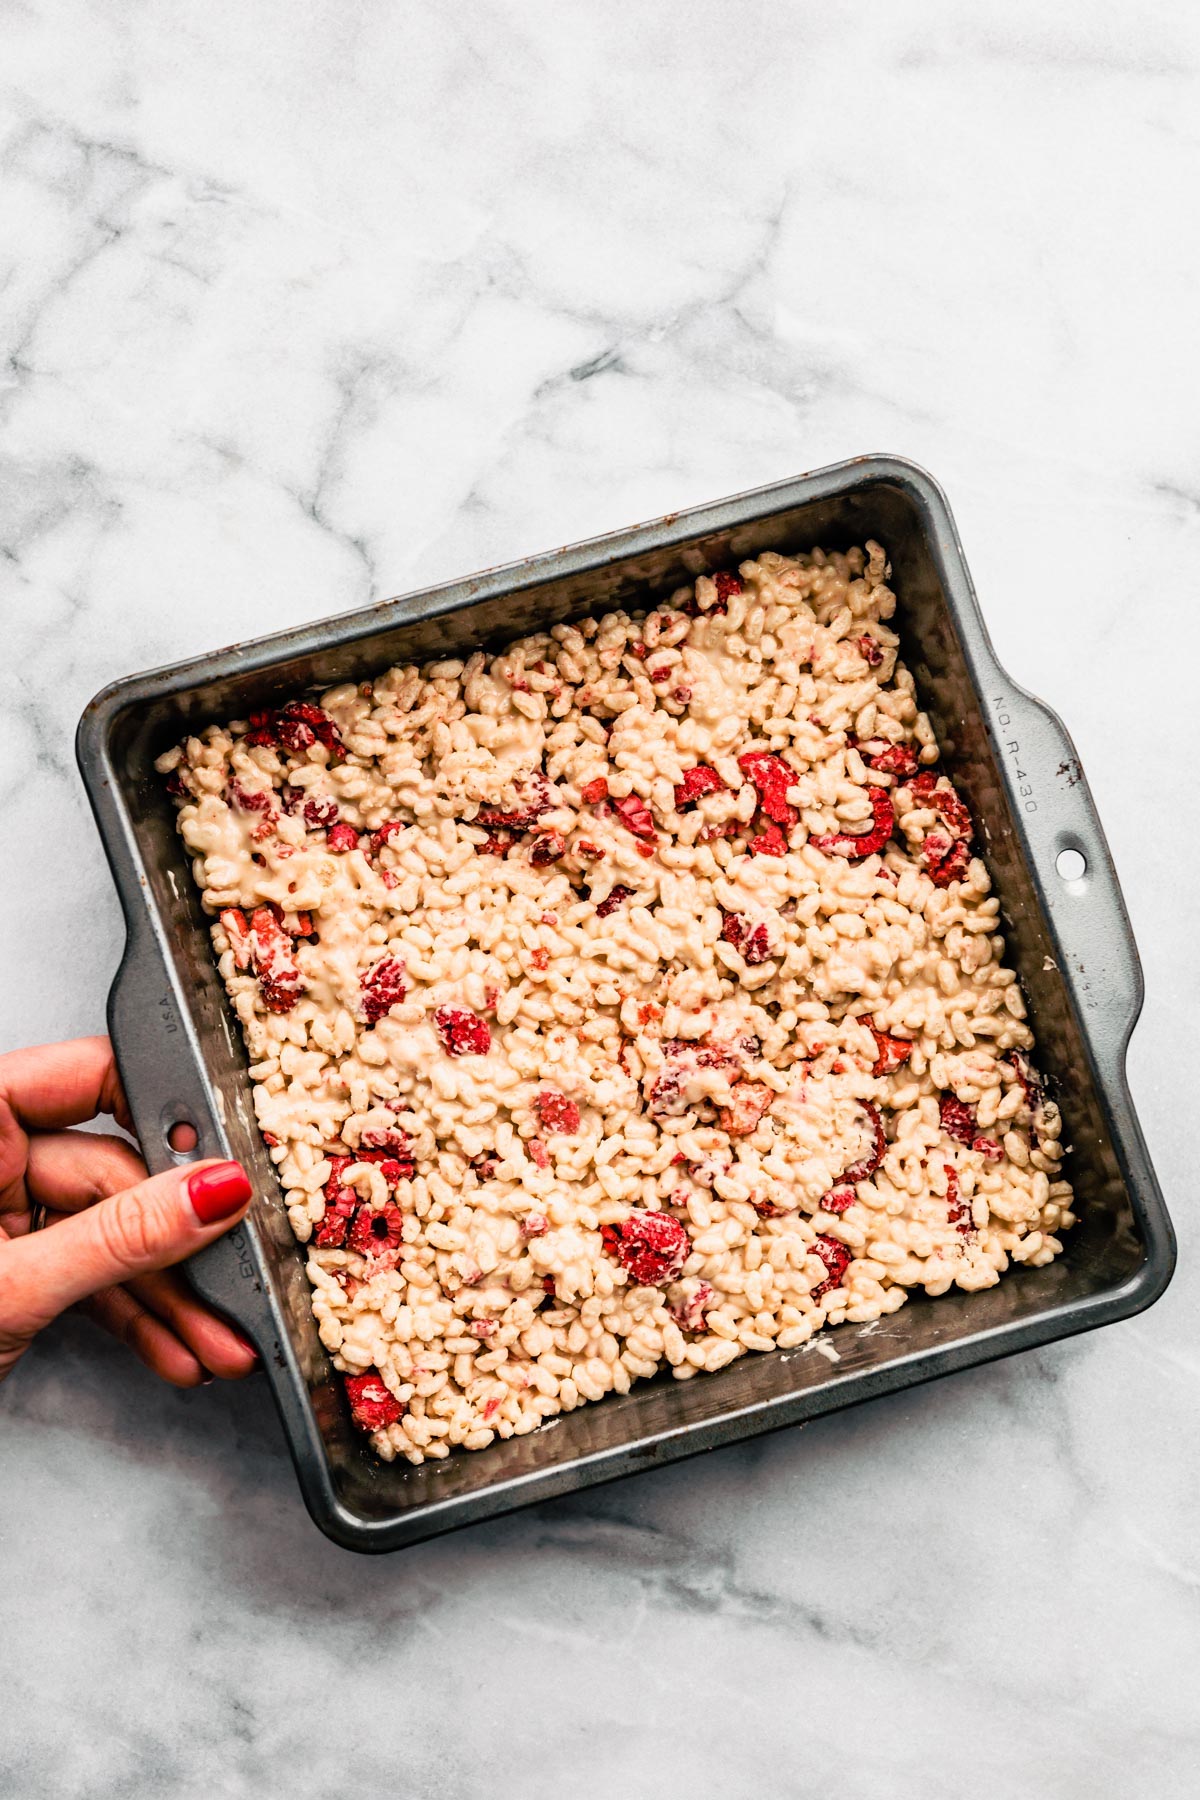 Overhead view a woman's hand holding onto side of baking pan filled with white chocolate rice crispy bars with dried raspberries.